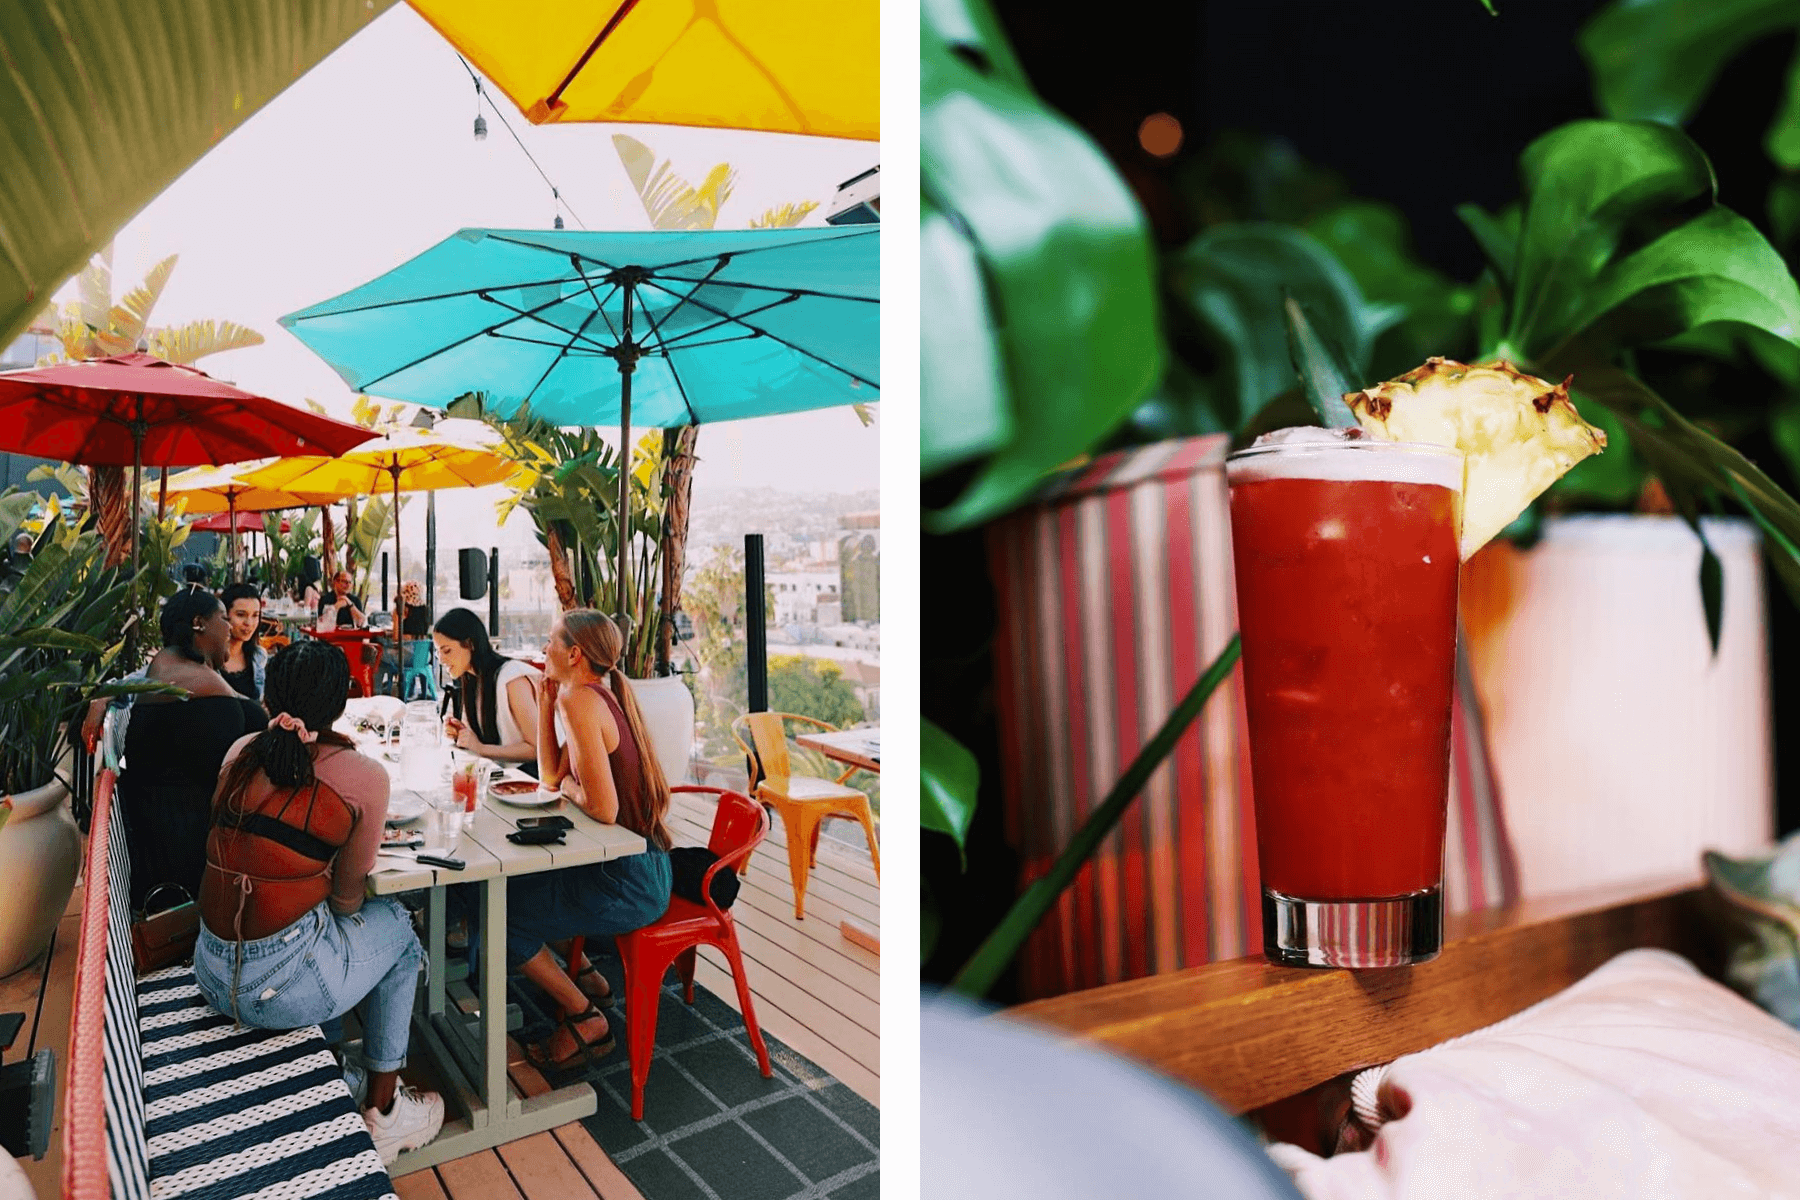 Left: People enjoying the rooftop at Mama Shelter LA; Right: A tropical drink with a pineapple slice.